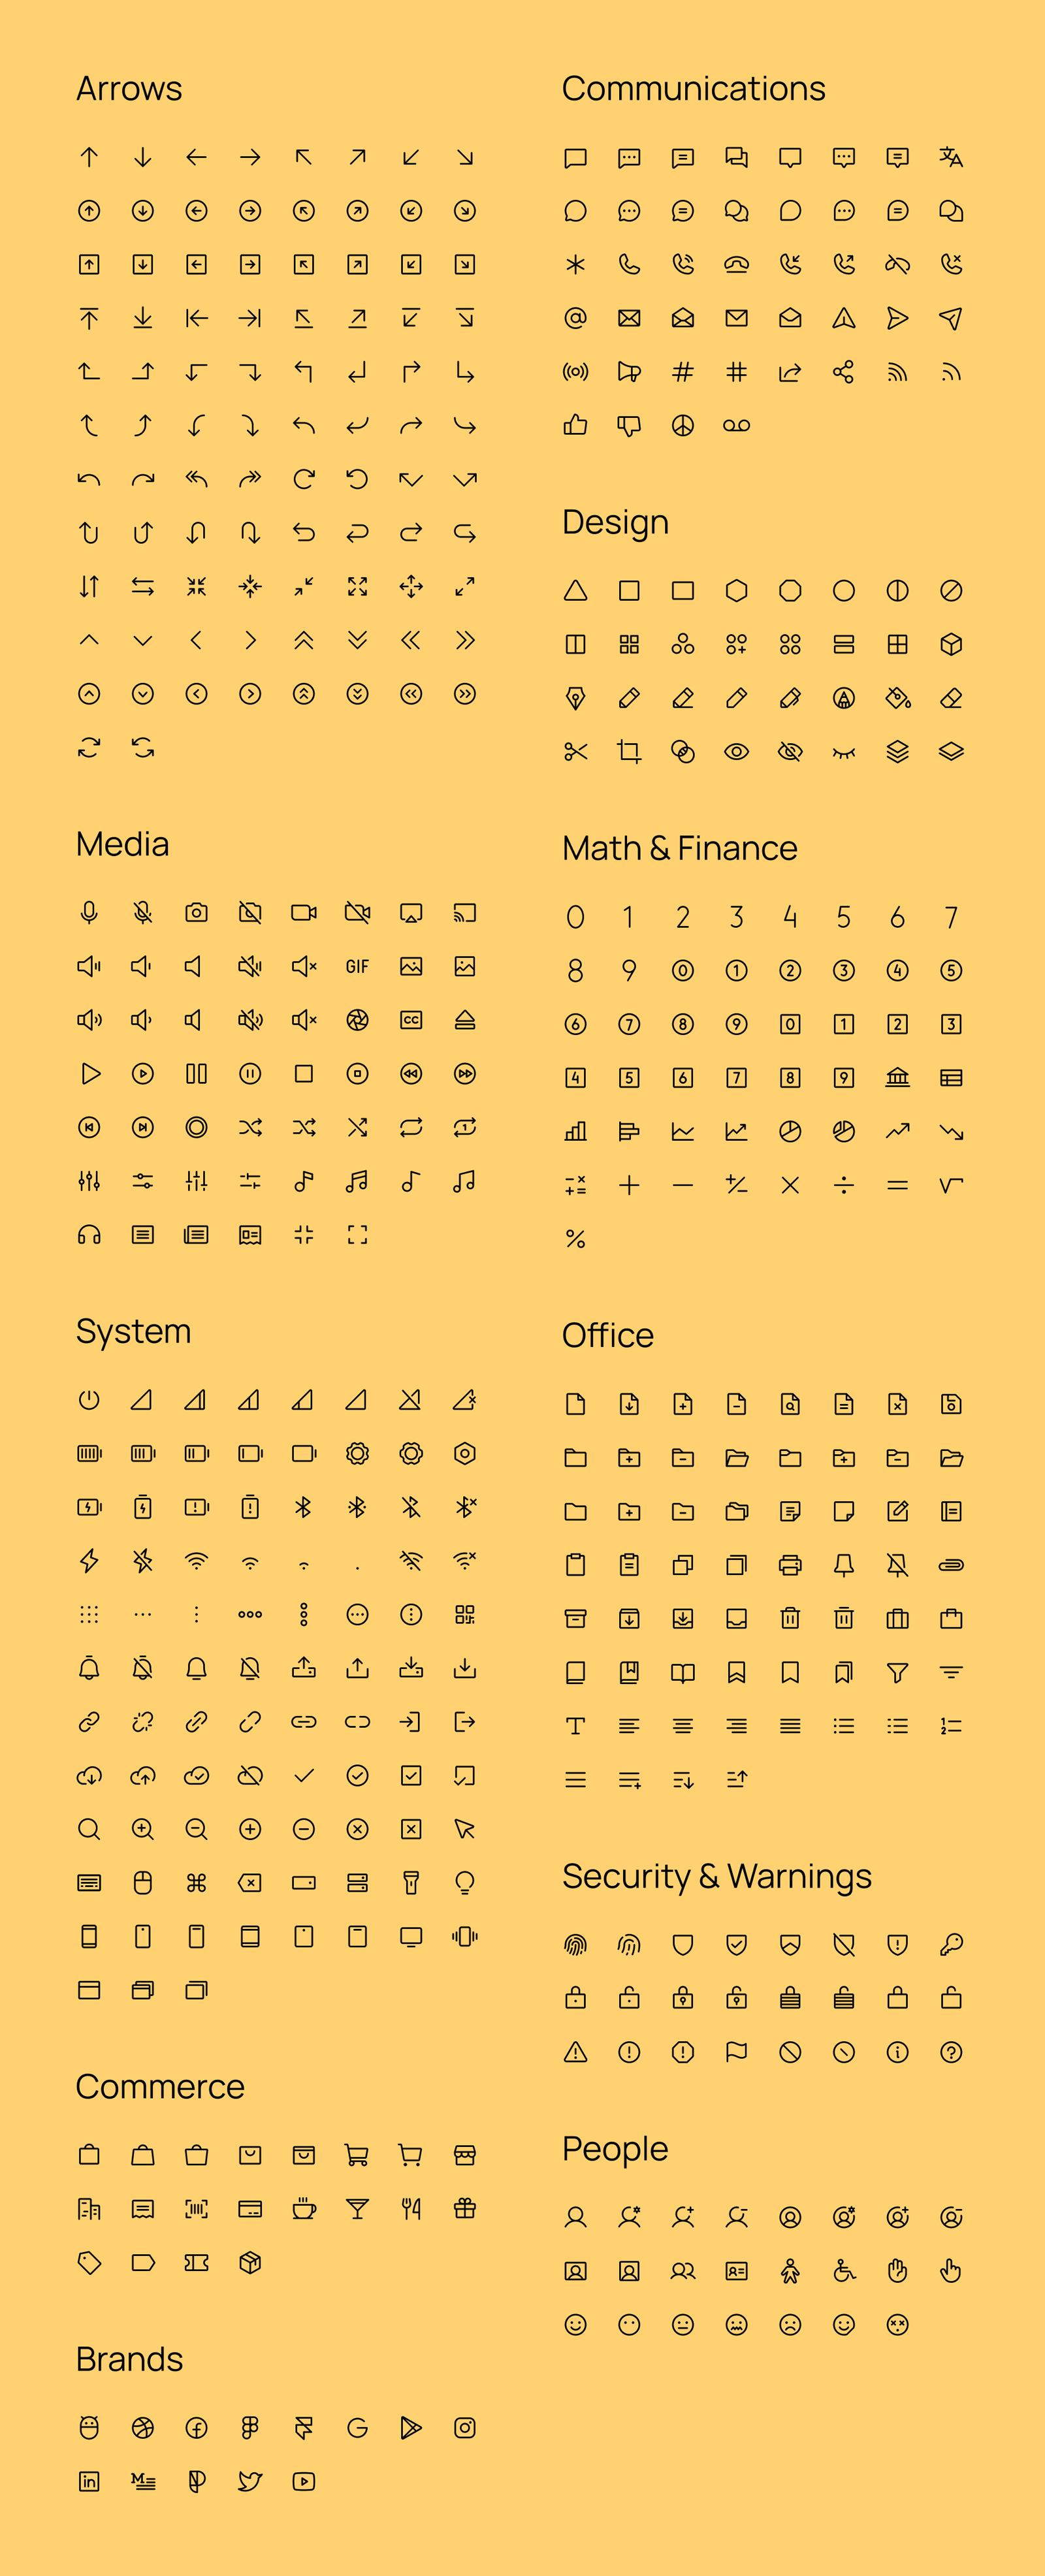 Phosphor Free and Open-Source Icons